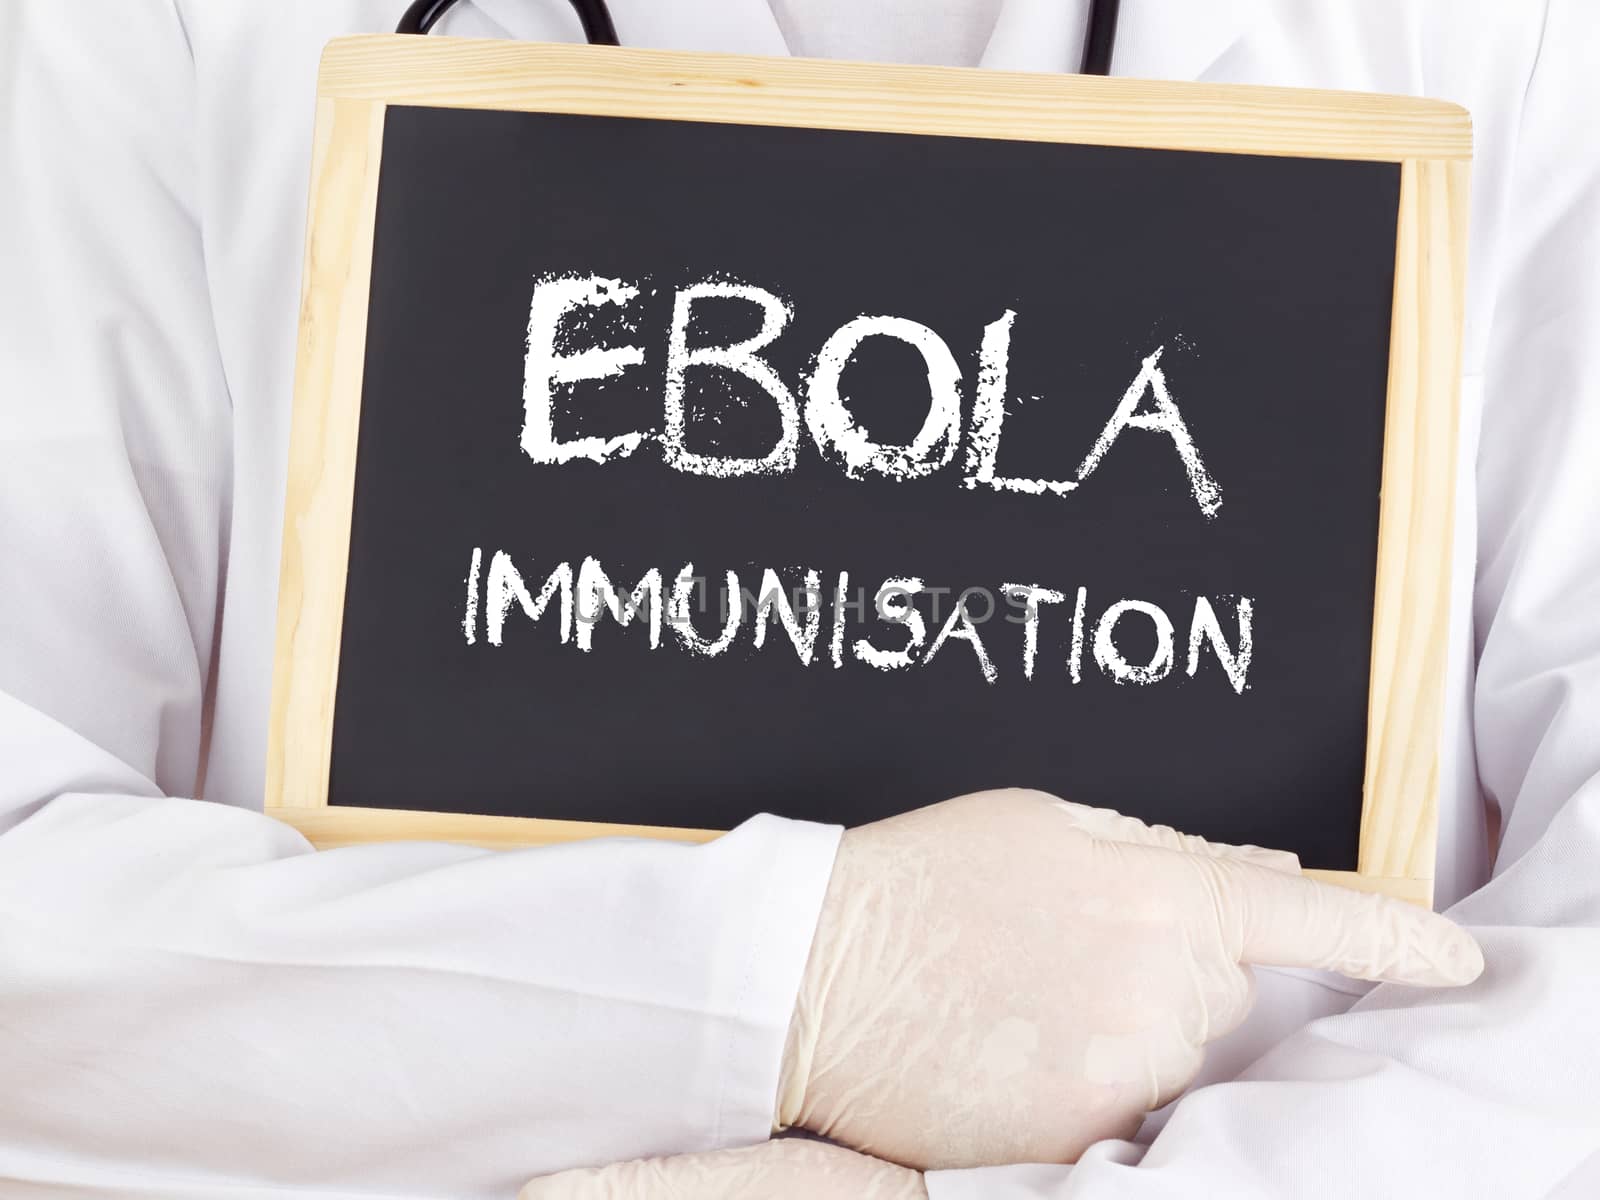 Doctor shows information: Ebola immunisation by gwolters